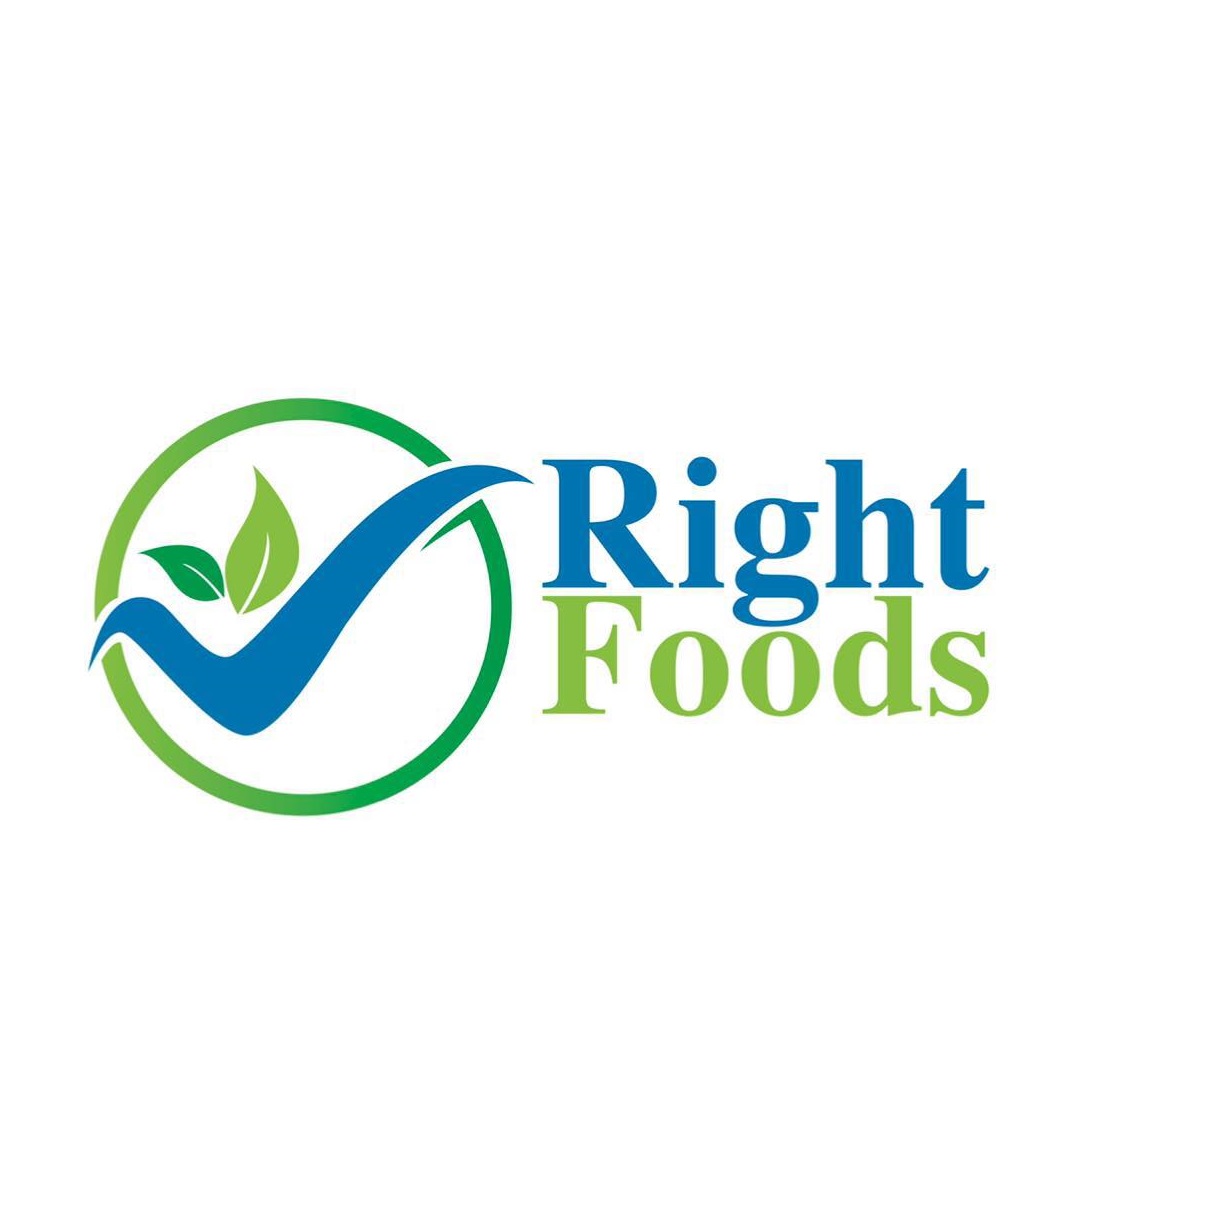 Right foods